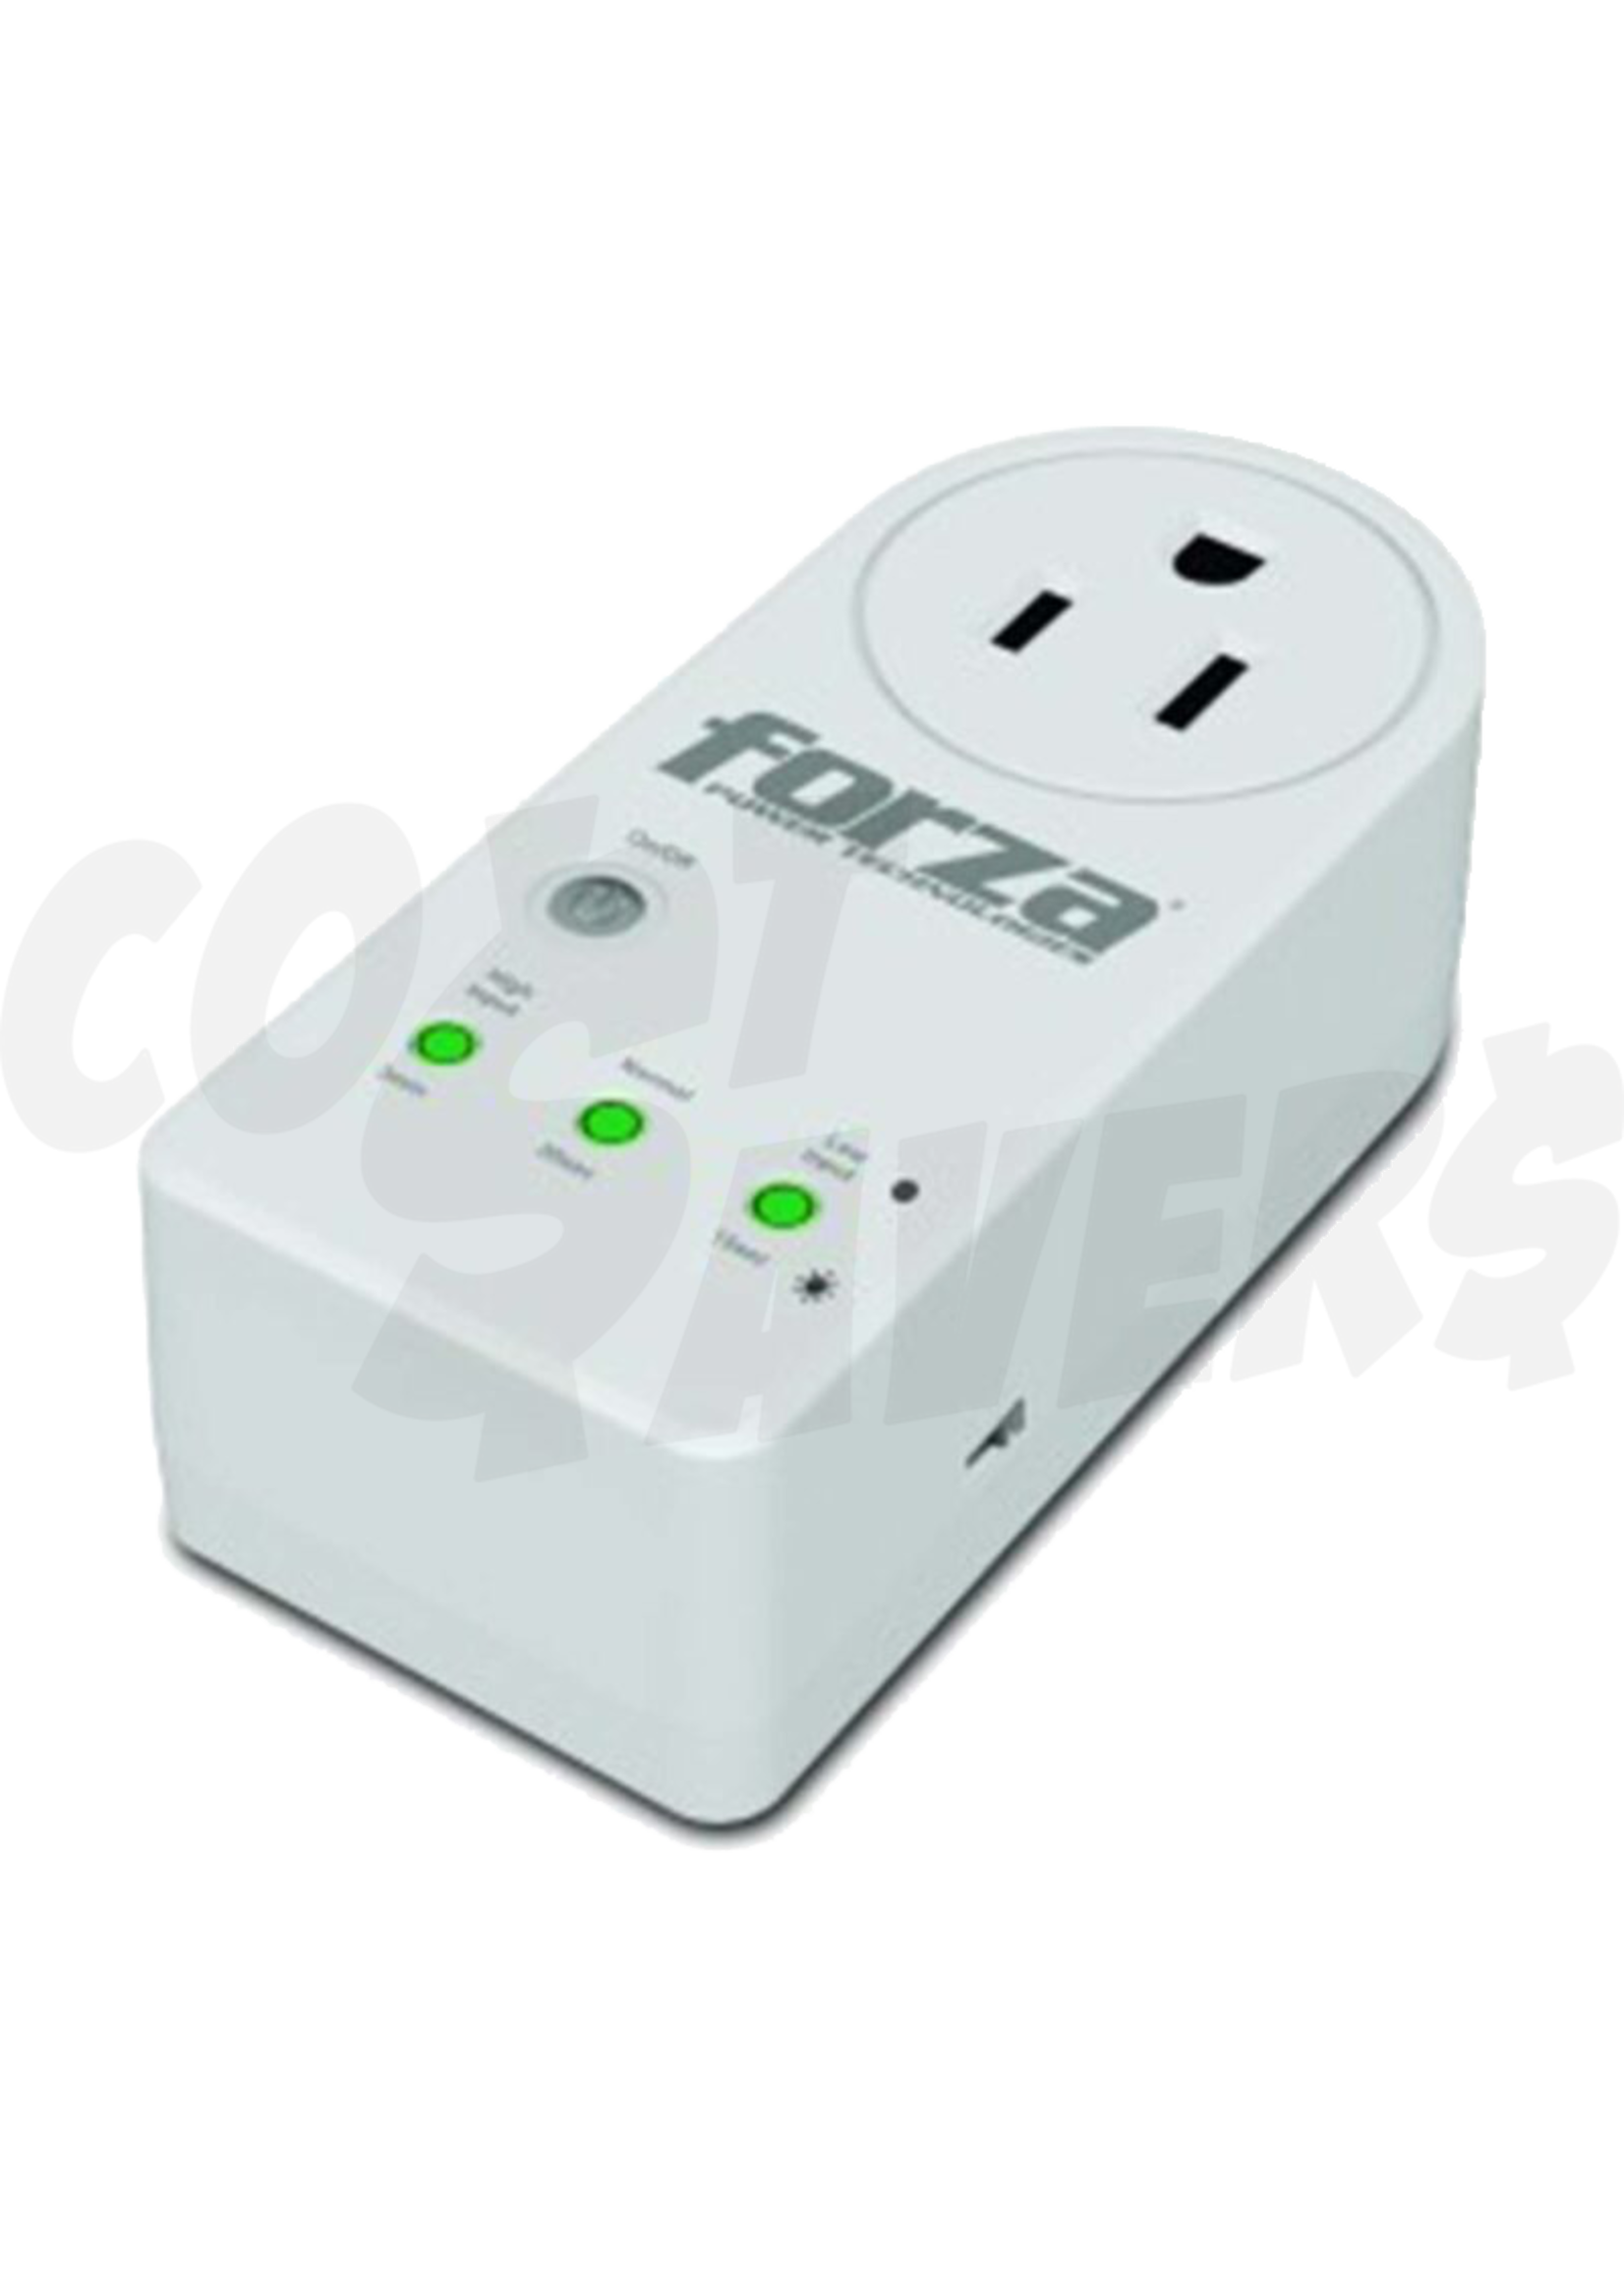 Forza Forza Voltage Protector 900 Joules (White)